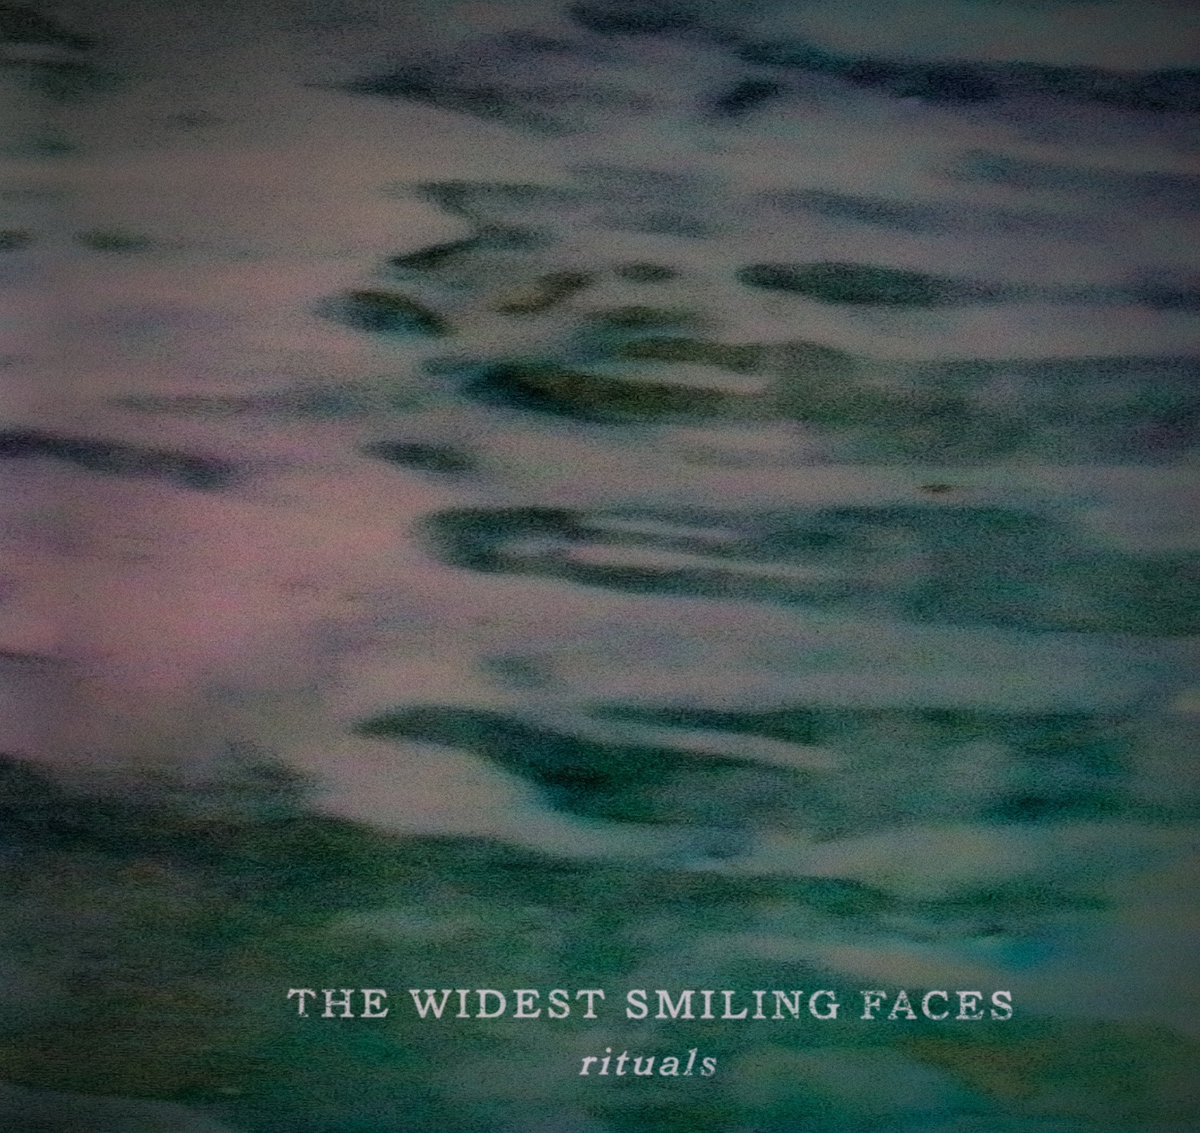 The Widest Smiling Faces – Rituals